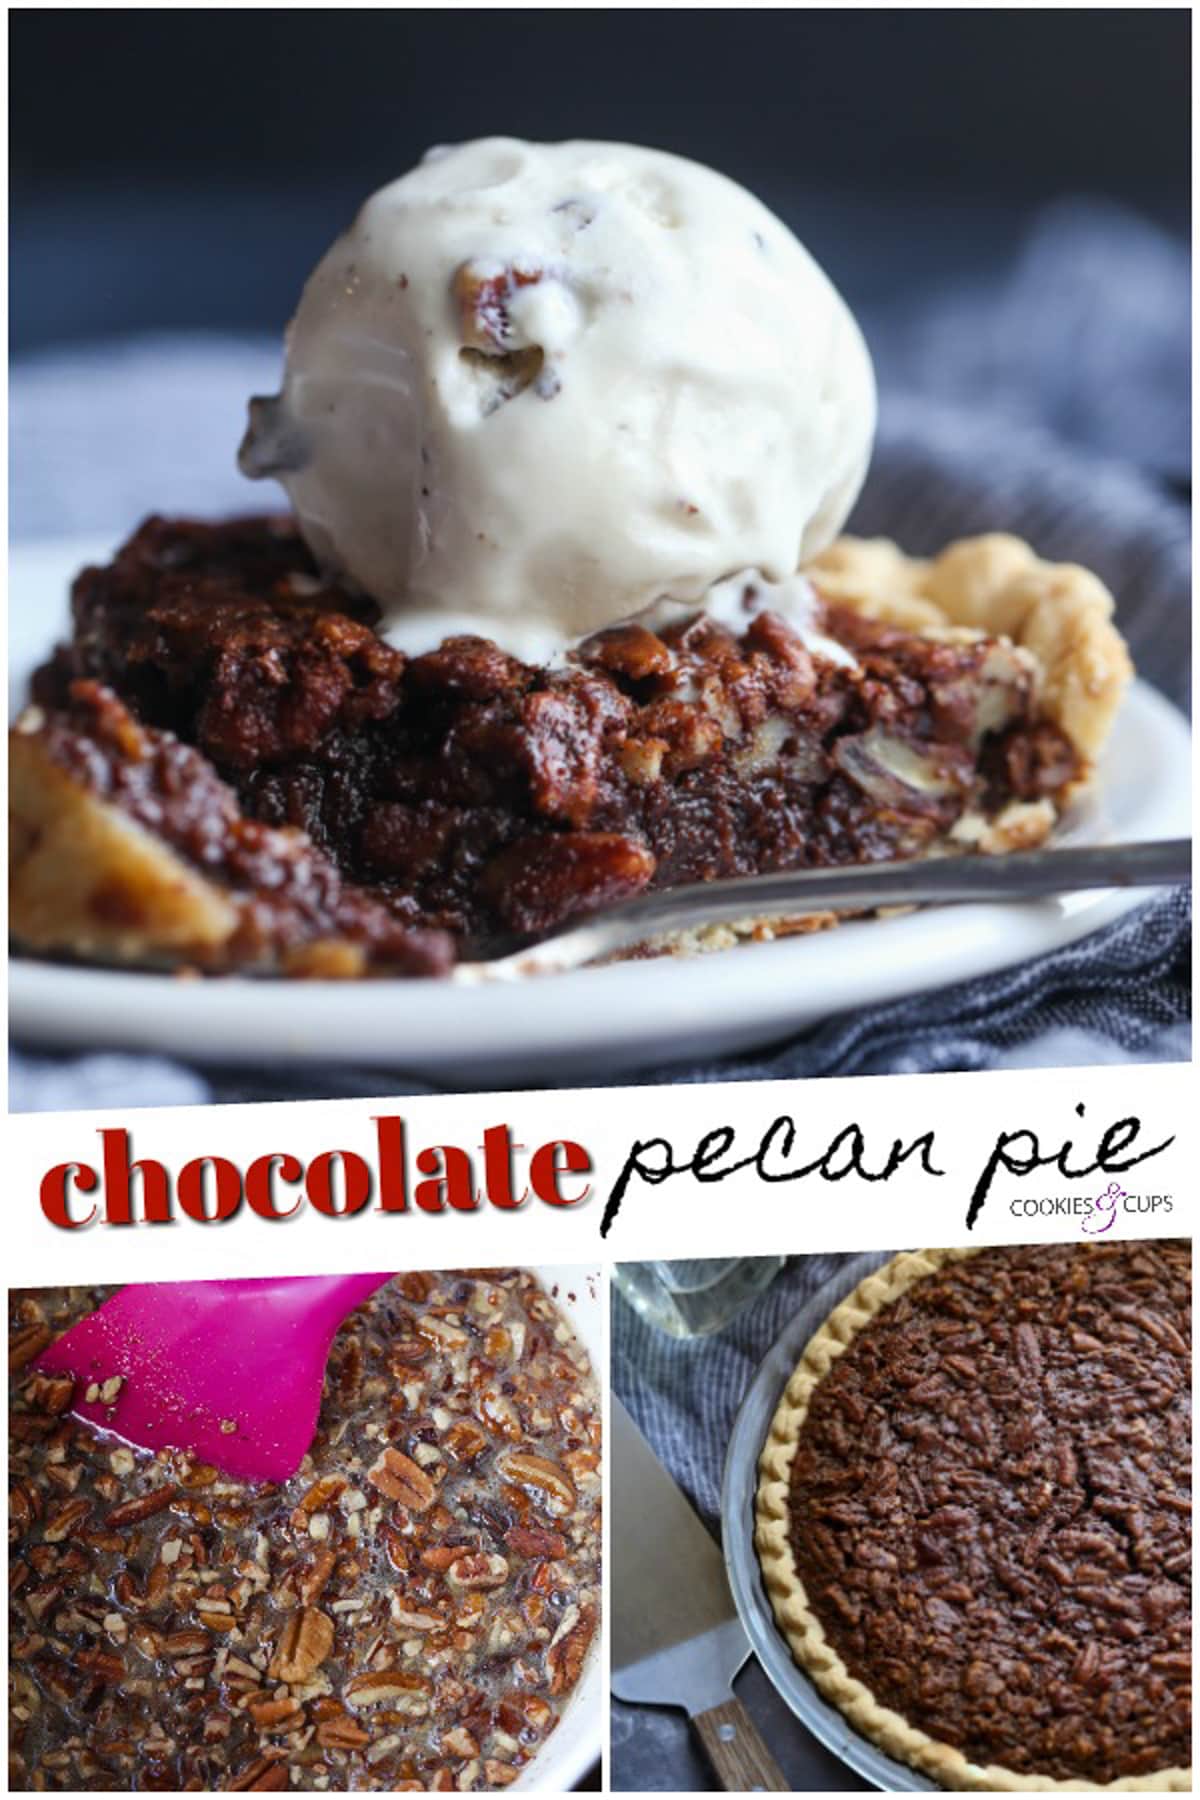 Chocolate Pecan Pie Image collage for Pinterest